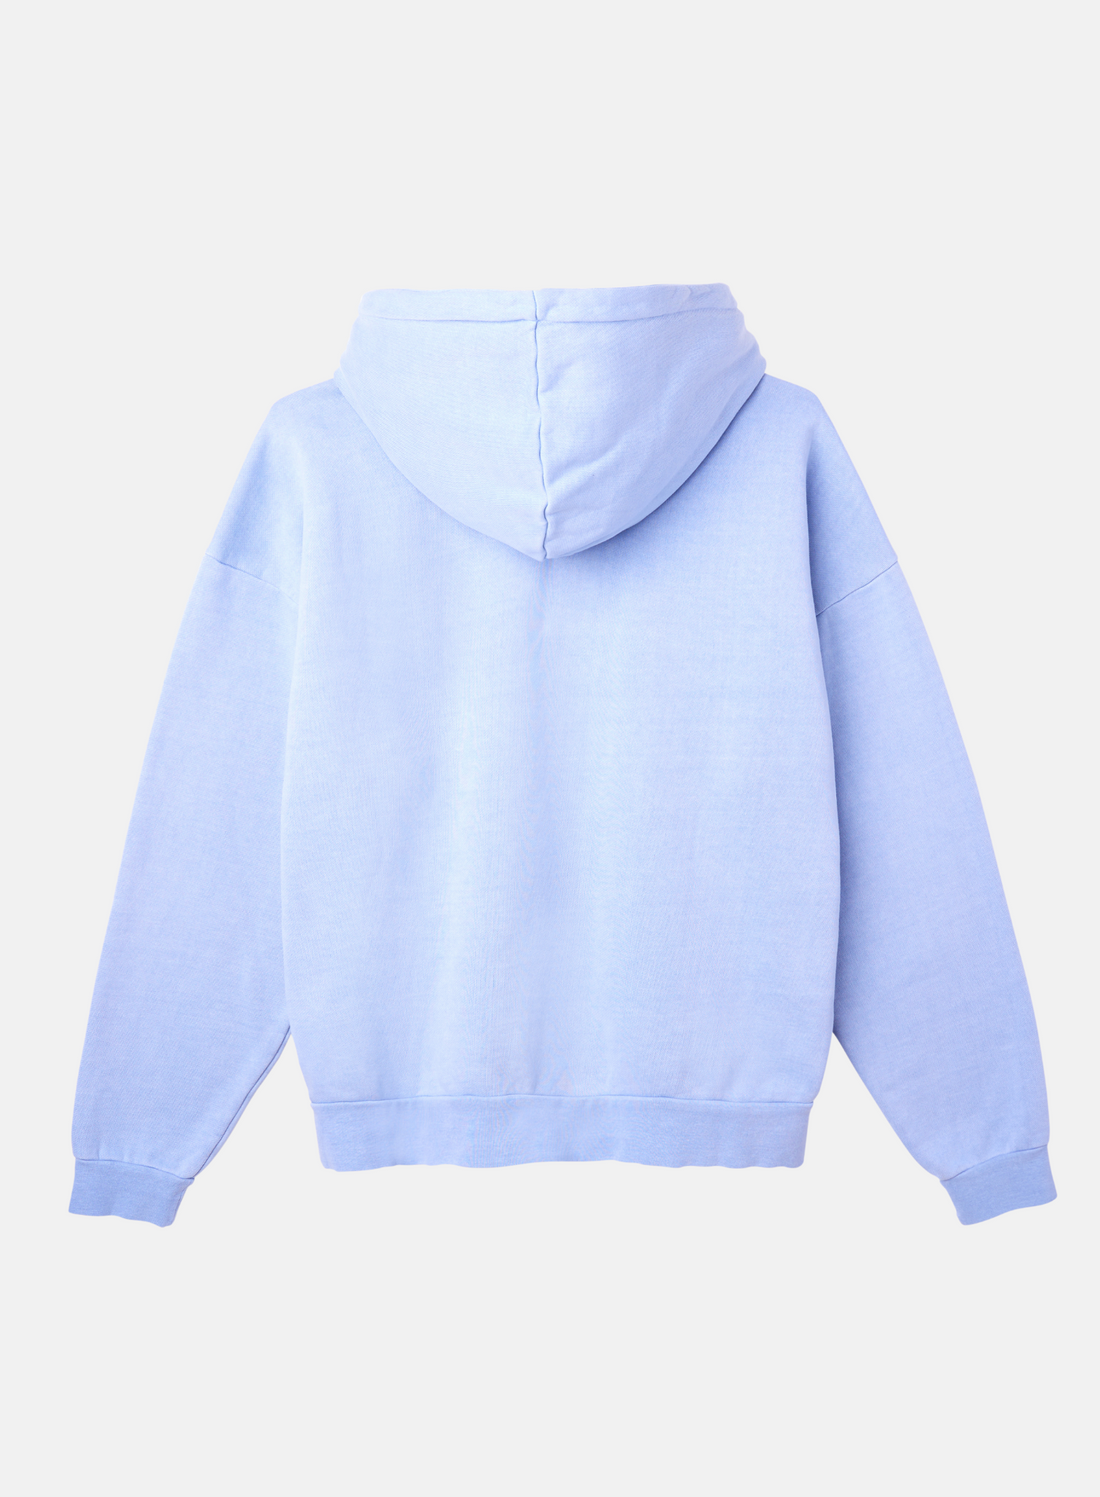 OBEY Pigment Dyed Hoodie Blue - Hympala Store 